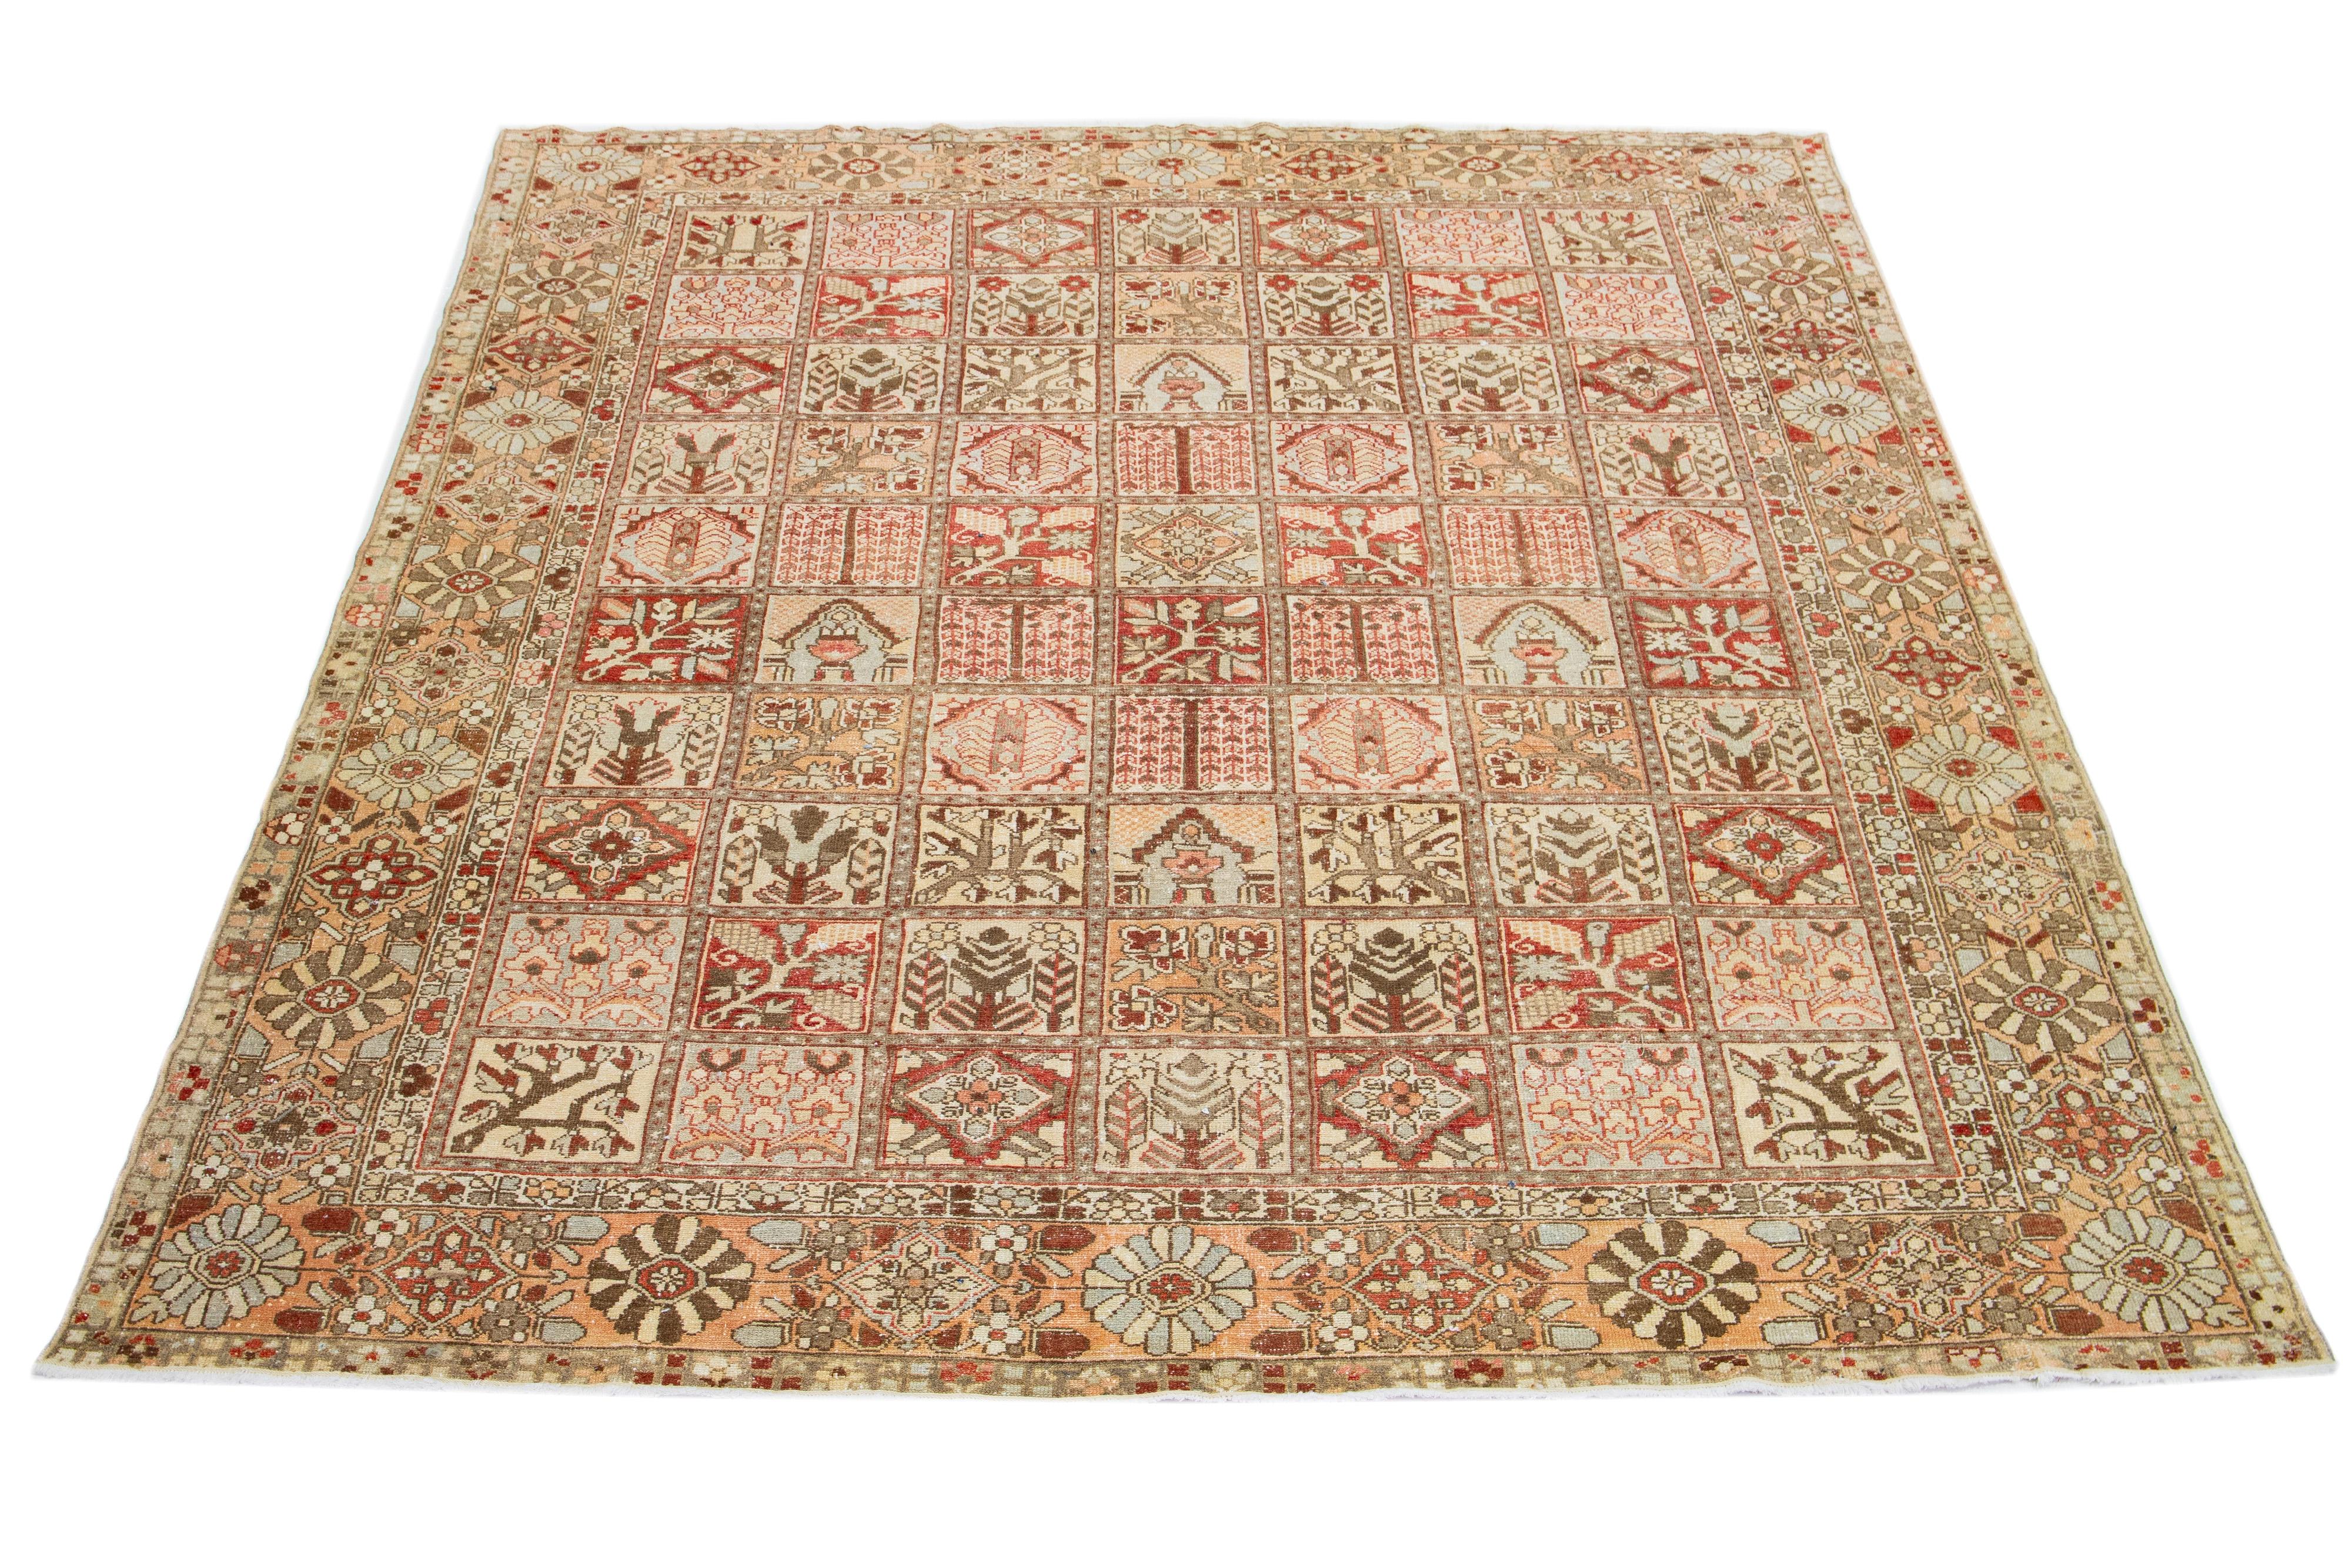 This beautiful Antique Bakhtiari hand-knotted wool rug features a color field in red rust, blue, beige, and peach shades. This Persian piece showcases a timeless floral pattern.

This rug measures 10' x 12'.
 